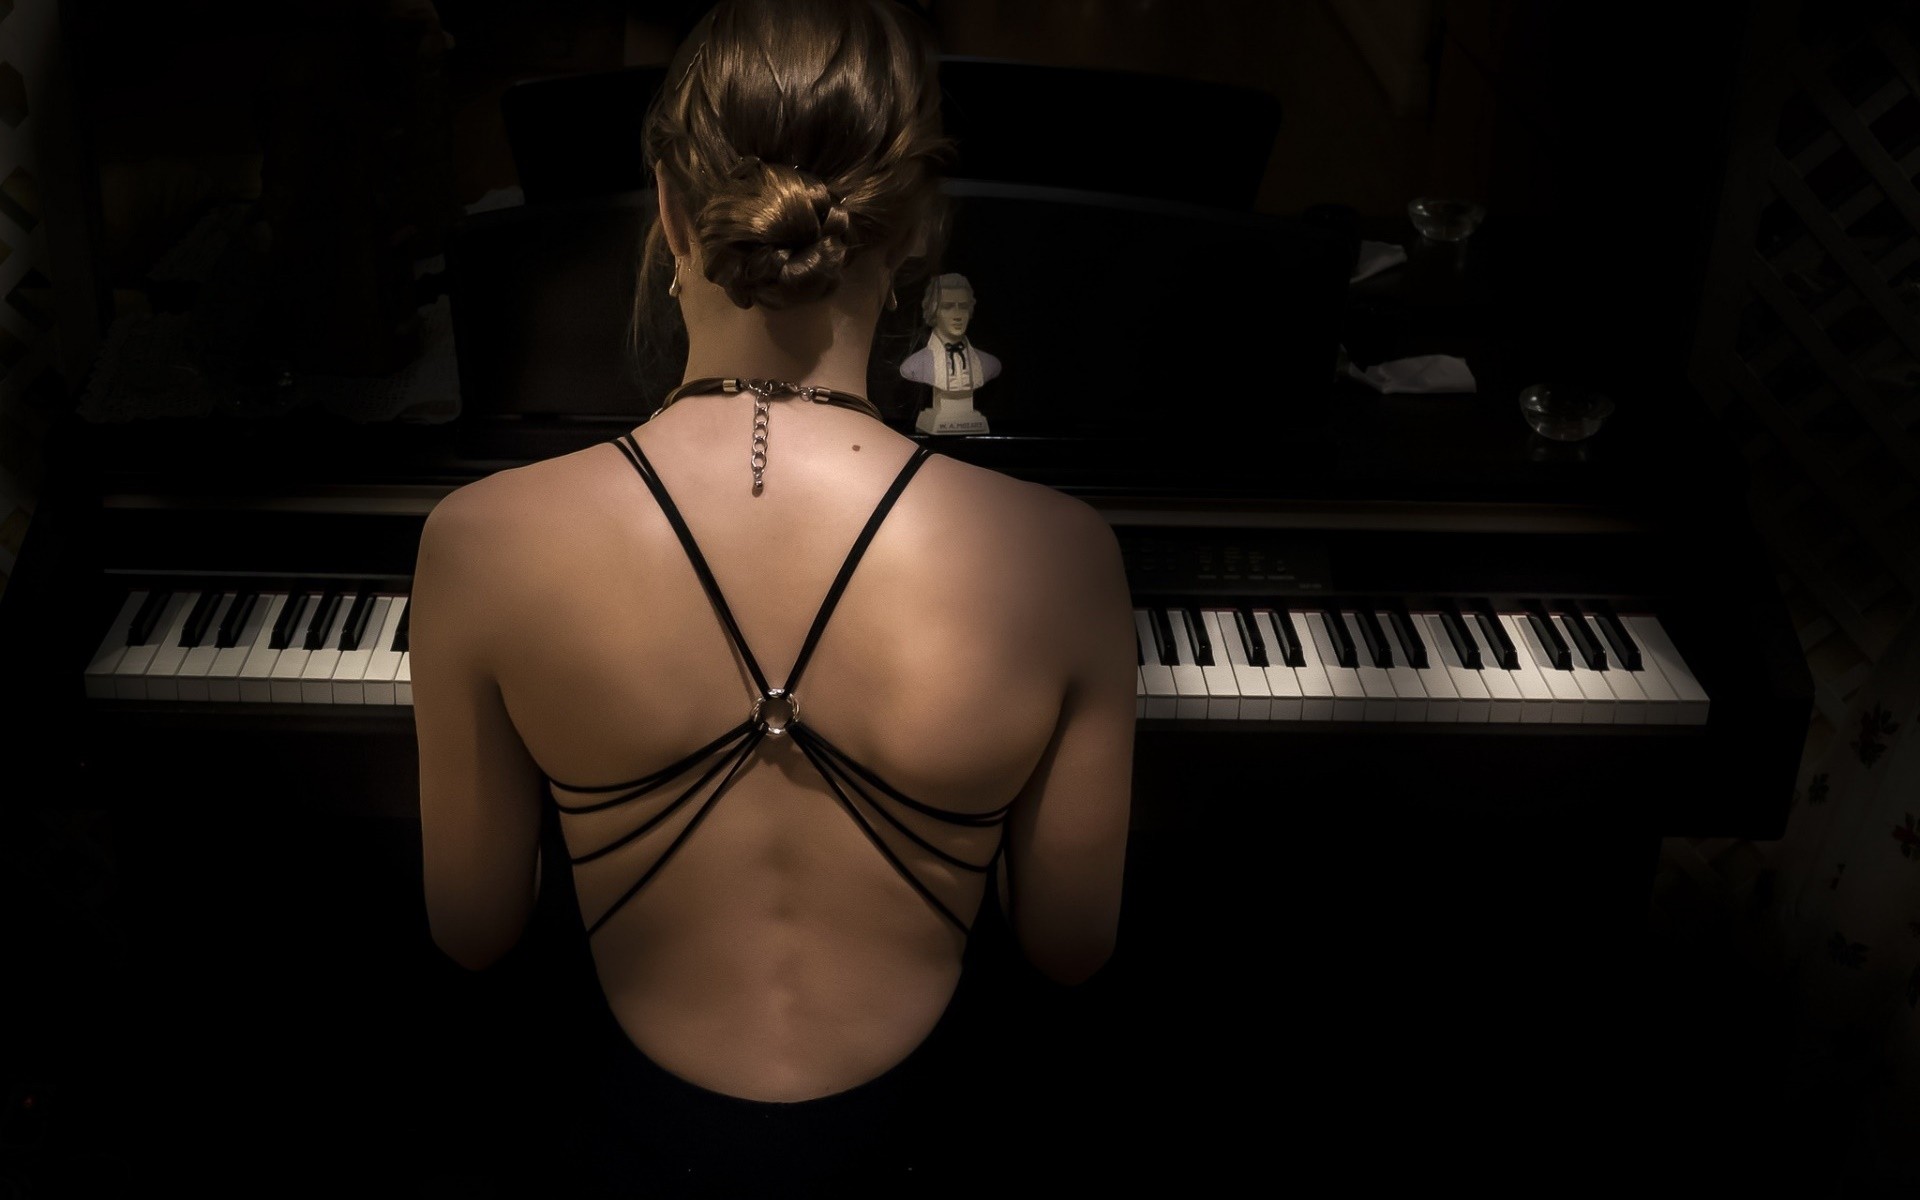 People 1920x1200 bare shoulders women piano music rear view musical instrument no bra